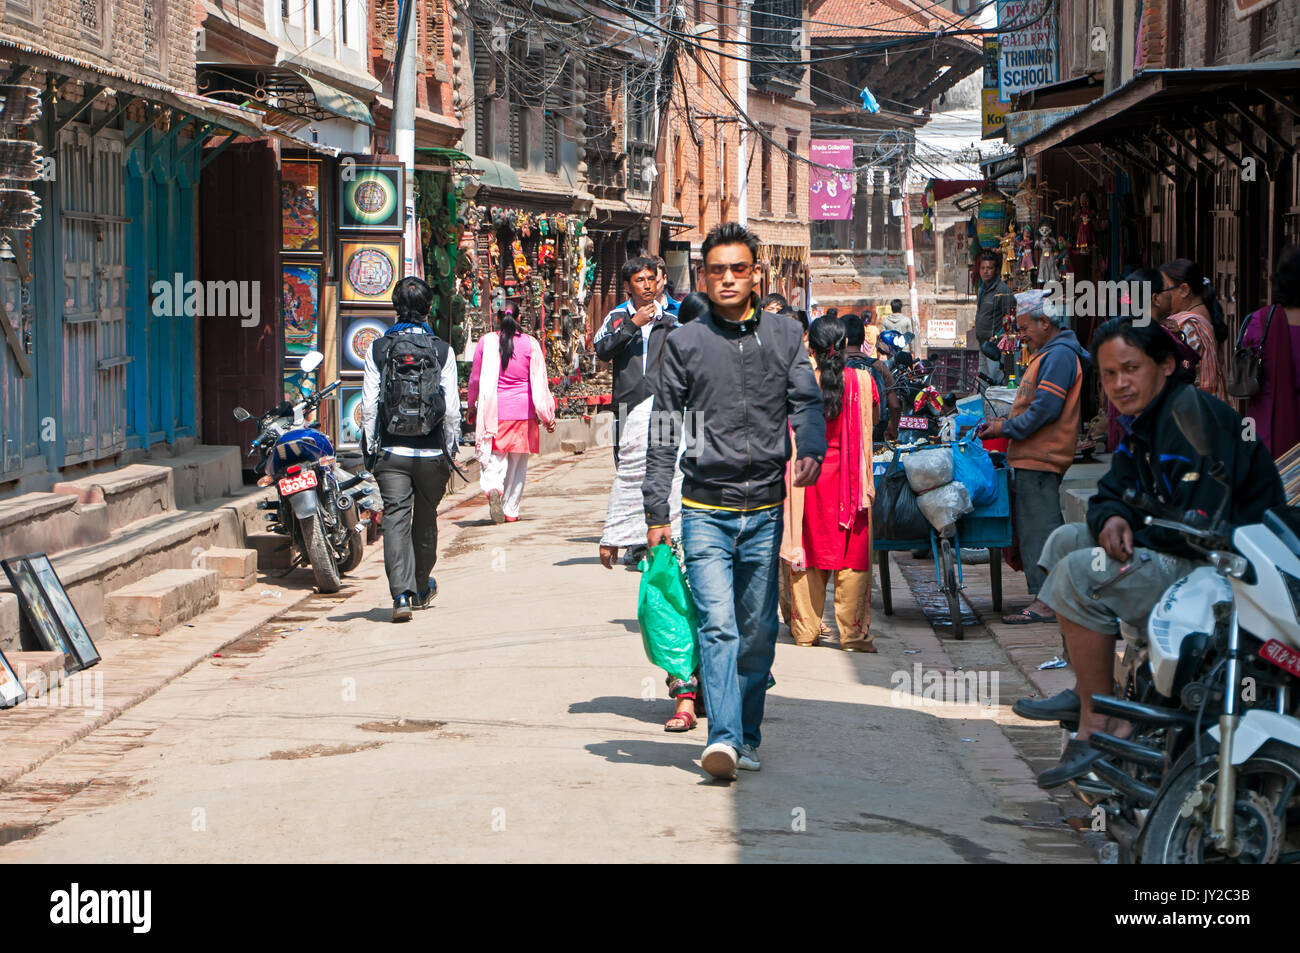 Kathmandu, Nepal - March 9, 2013: Crowd of people in the alley of Thamel street. Thamel is a commercial neighbourhood in Kathmandu, the capital of Nep Stock Photo